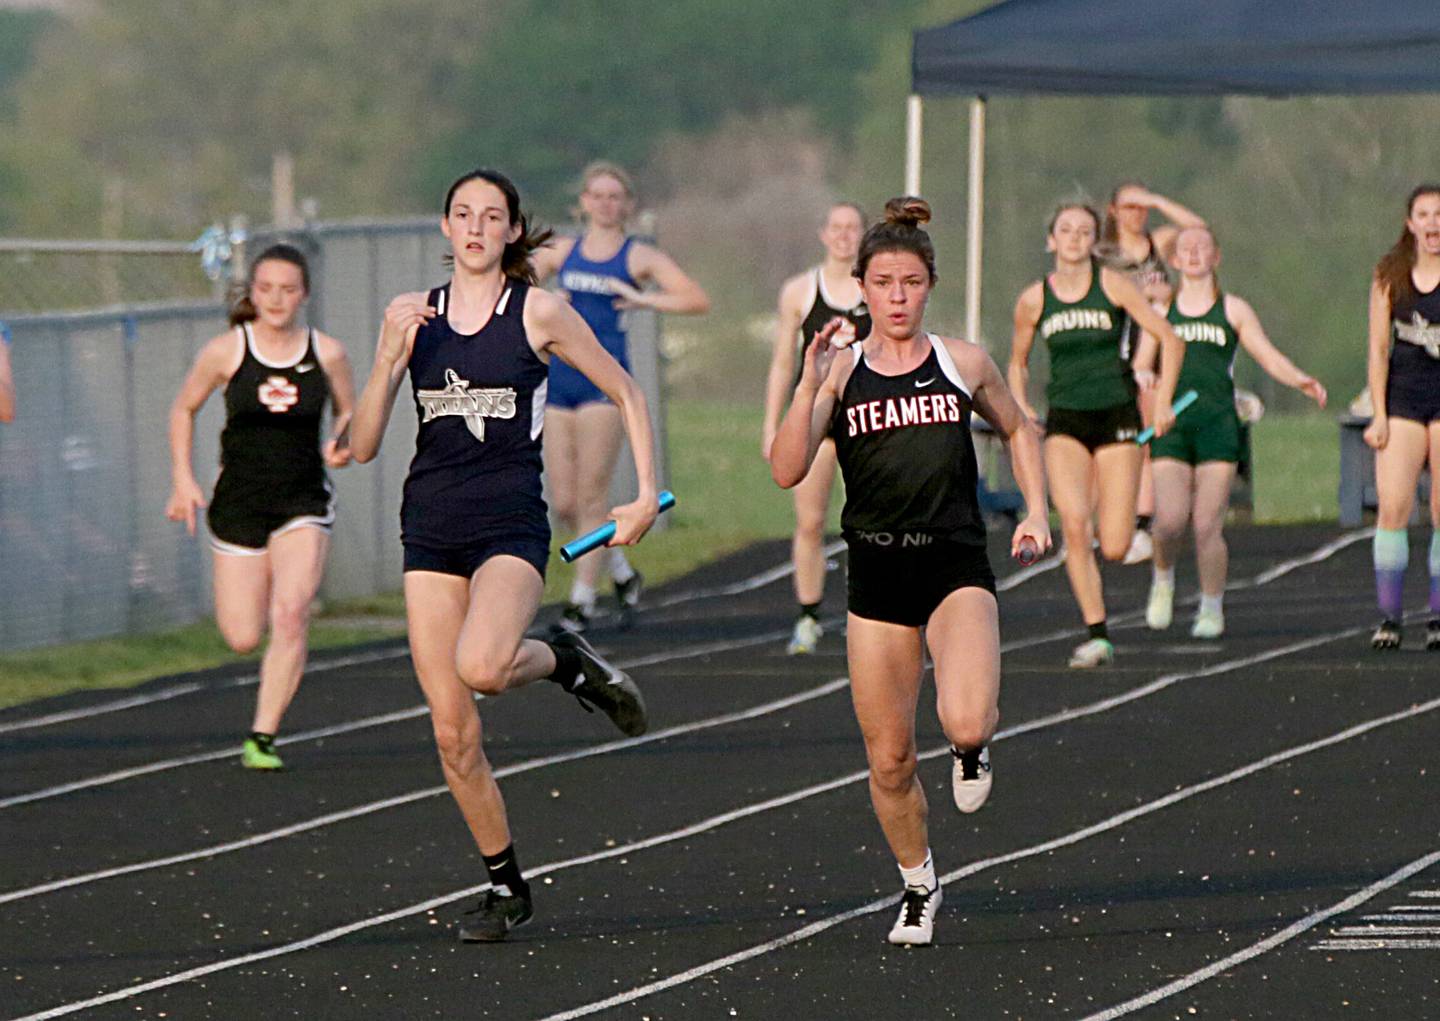 Fulton's Lauren Mahoney runs the 4x100 relay in the Class 1A girls track sectional on Wednesday, May 11, 2022 at Bureau Valley High School in Manlius.